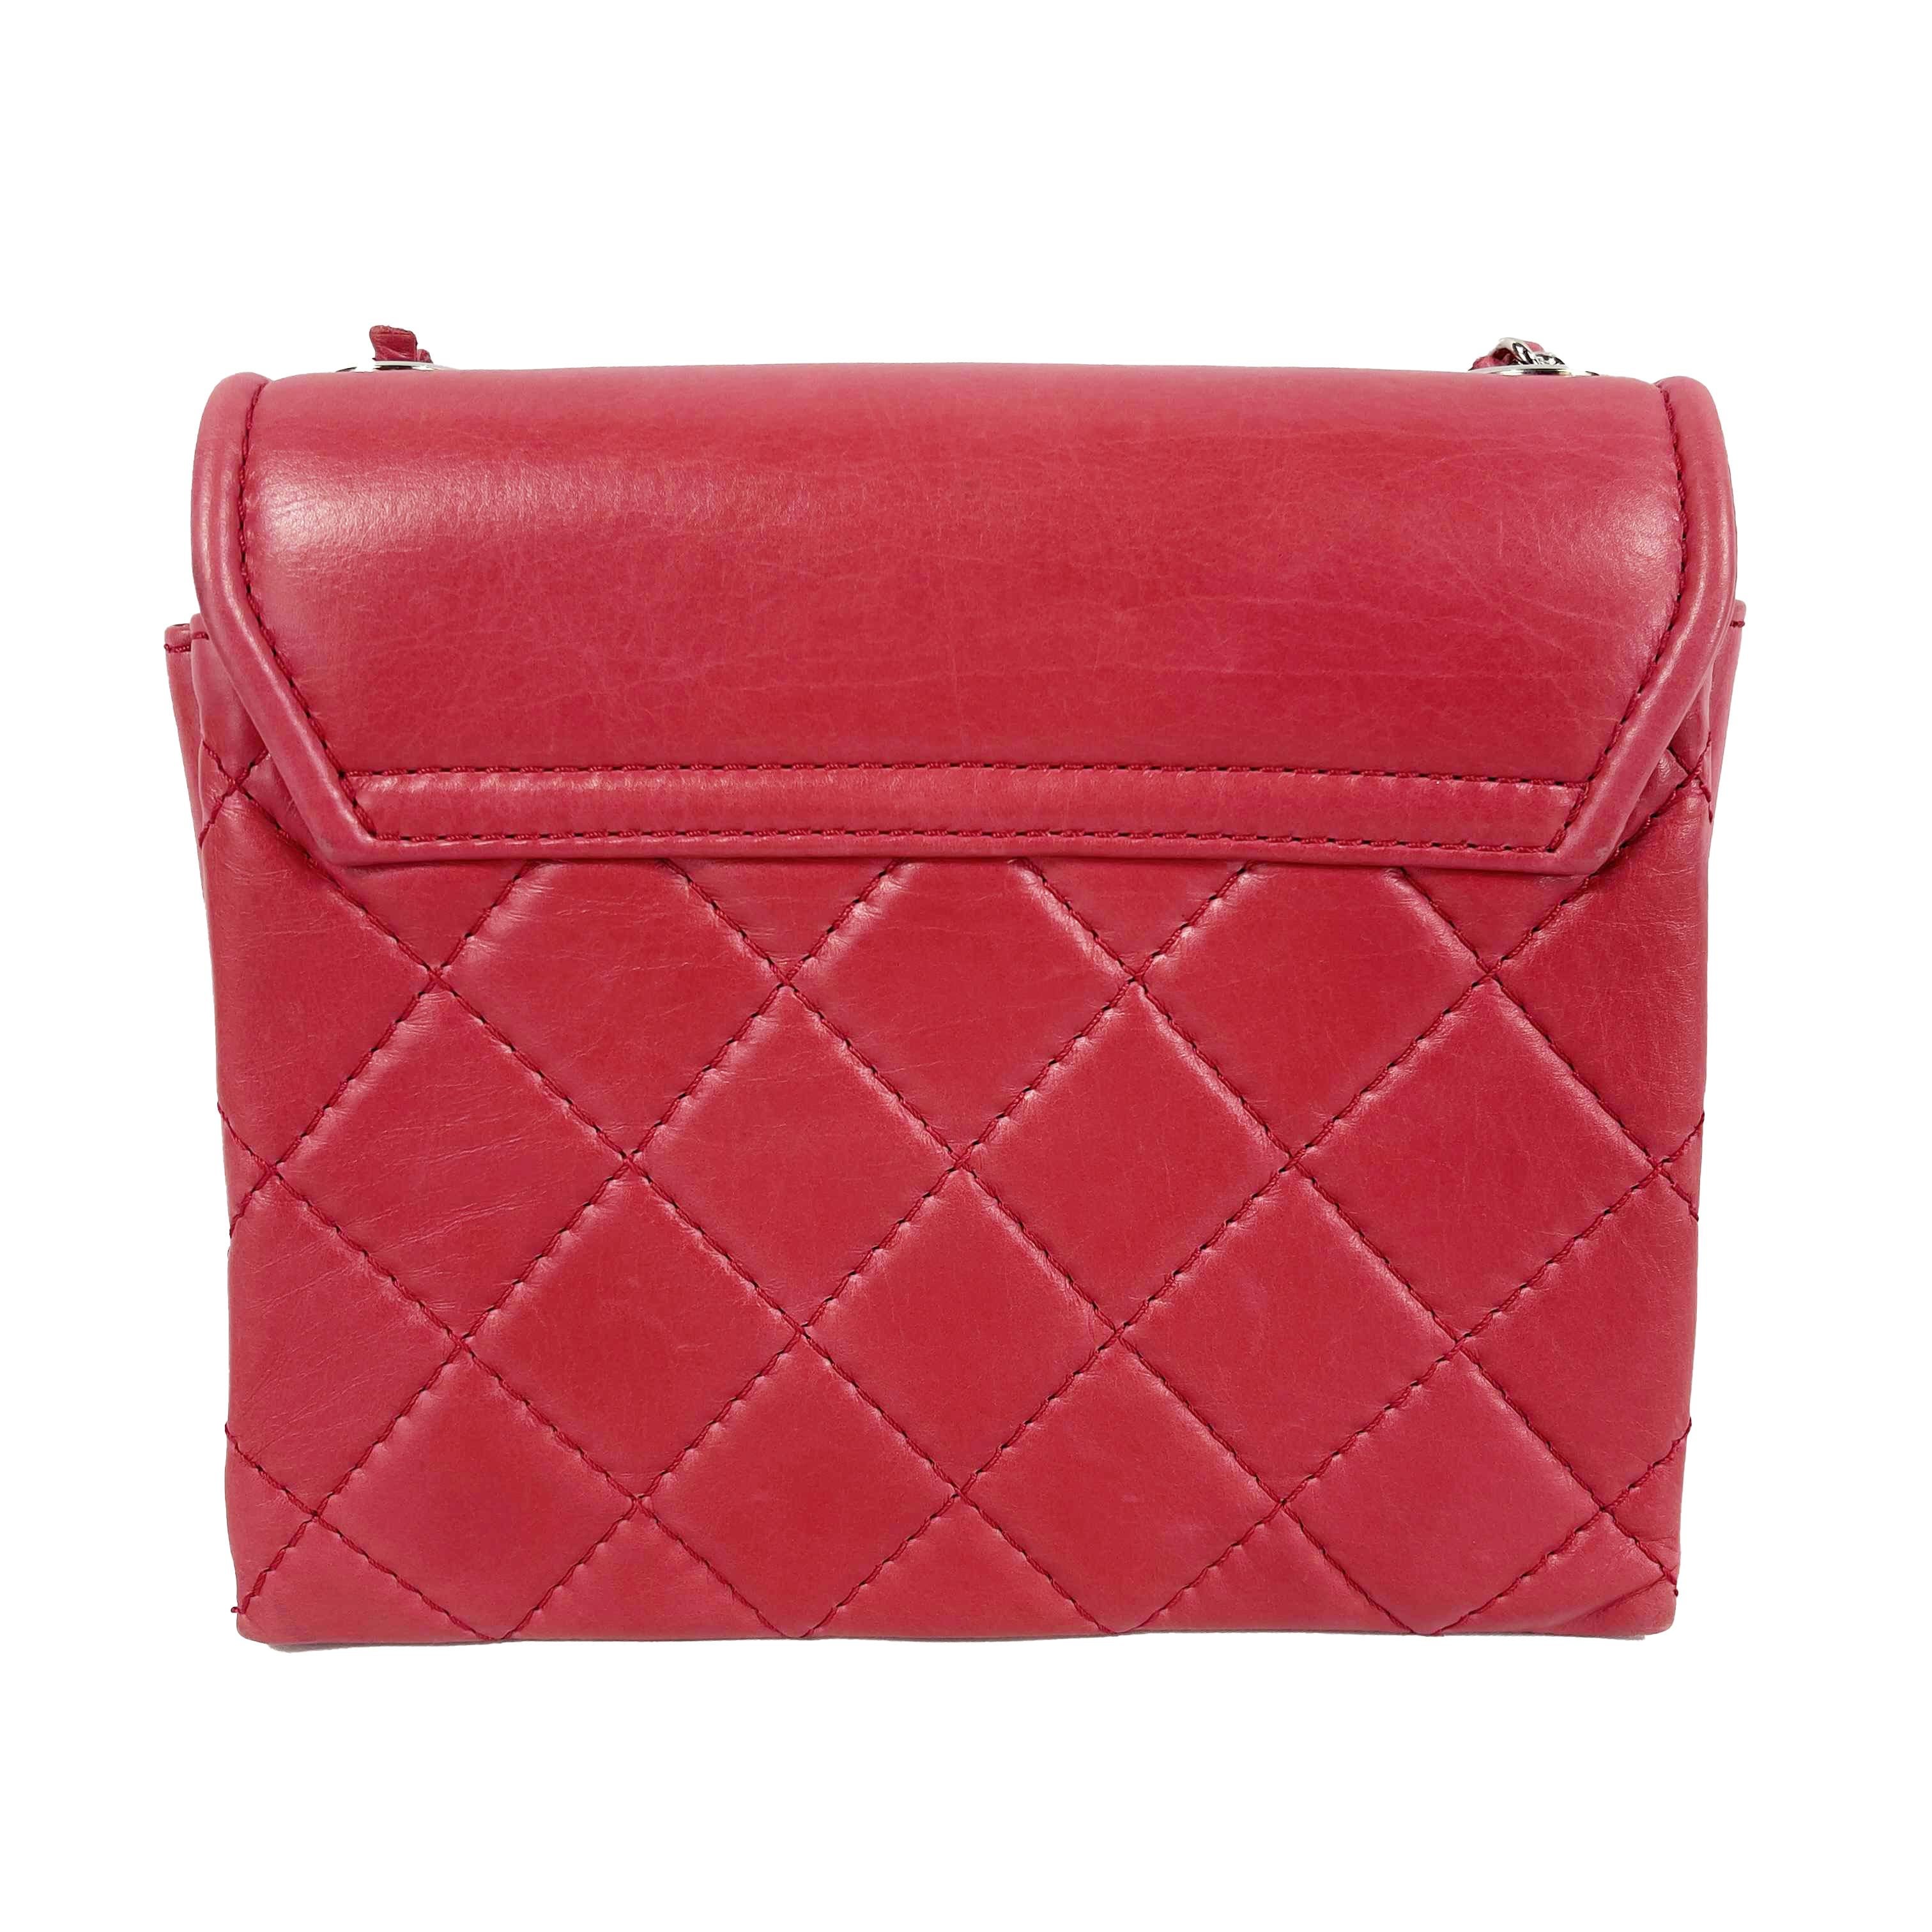 CHANEL - Square Flap Quilted Lambskin Shoulder Crossbody - Pink / Silver-tone

Description

This square style bag is made of deep pink soft quilted lambskin.
Large CC logo hinge lock closure.
Opens to 2 compartments and one zip pocket.
Threaded